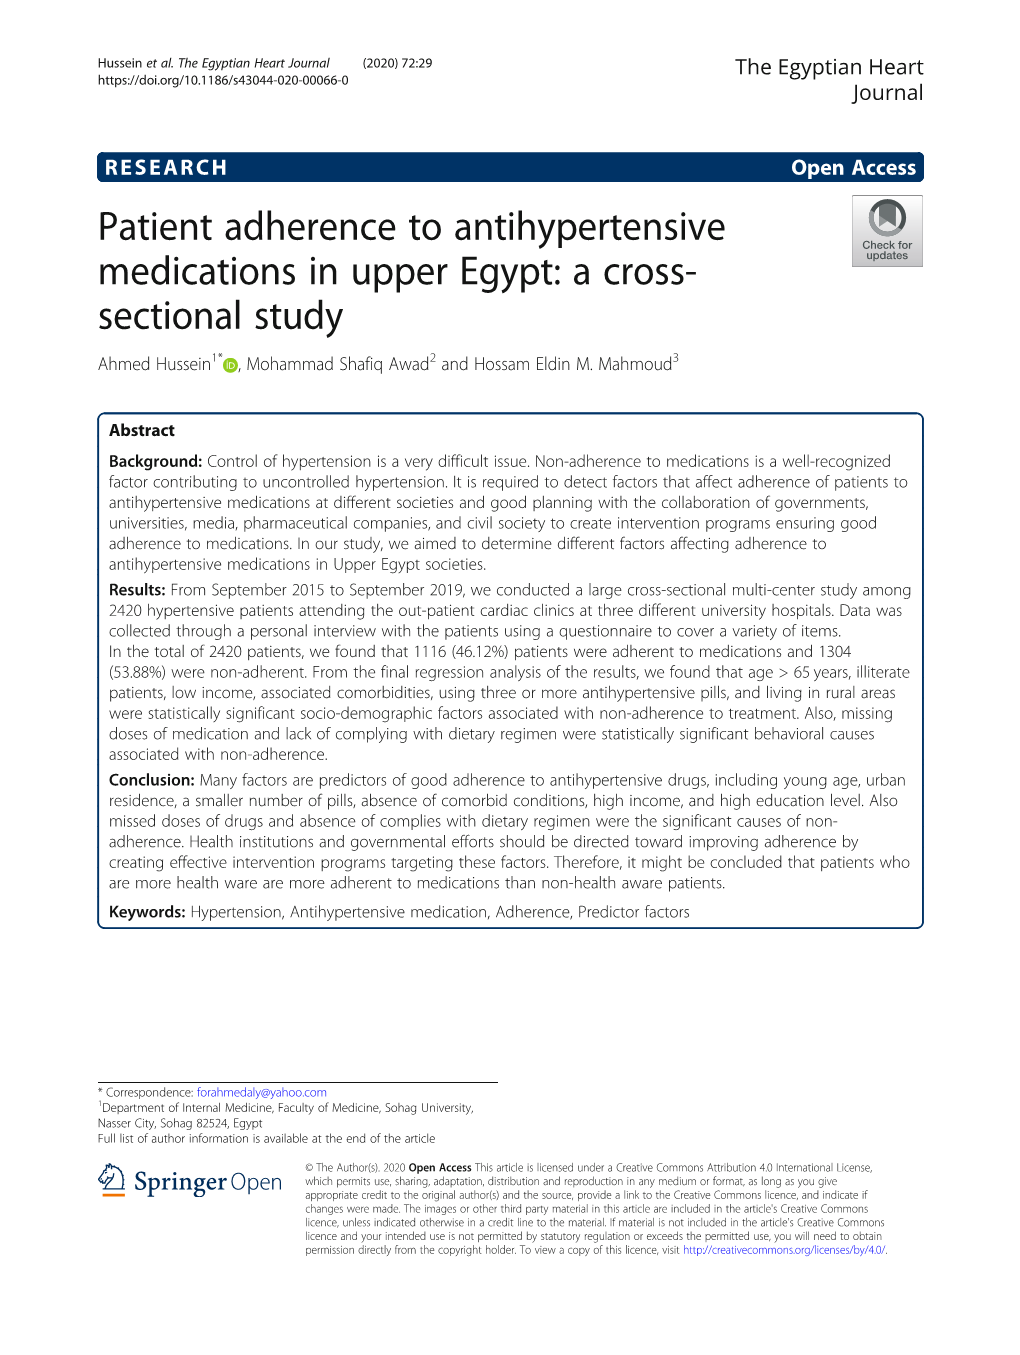 Patient Adherence to Antihypertensive Medications in Upper Egypt: a Cross- Sectional Study Ahmed Hussein1* , Mohammad Shafiq Awad2 and Hossam Eldin M